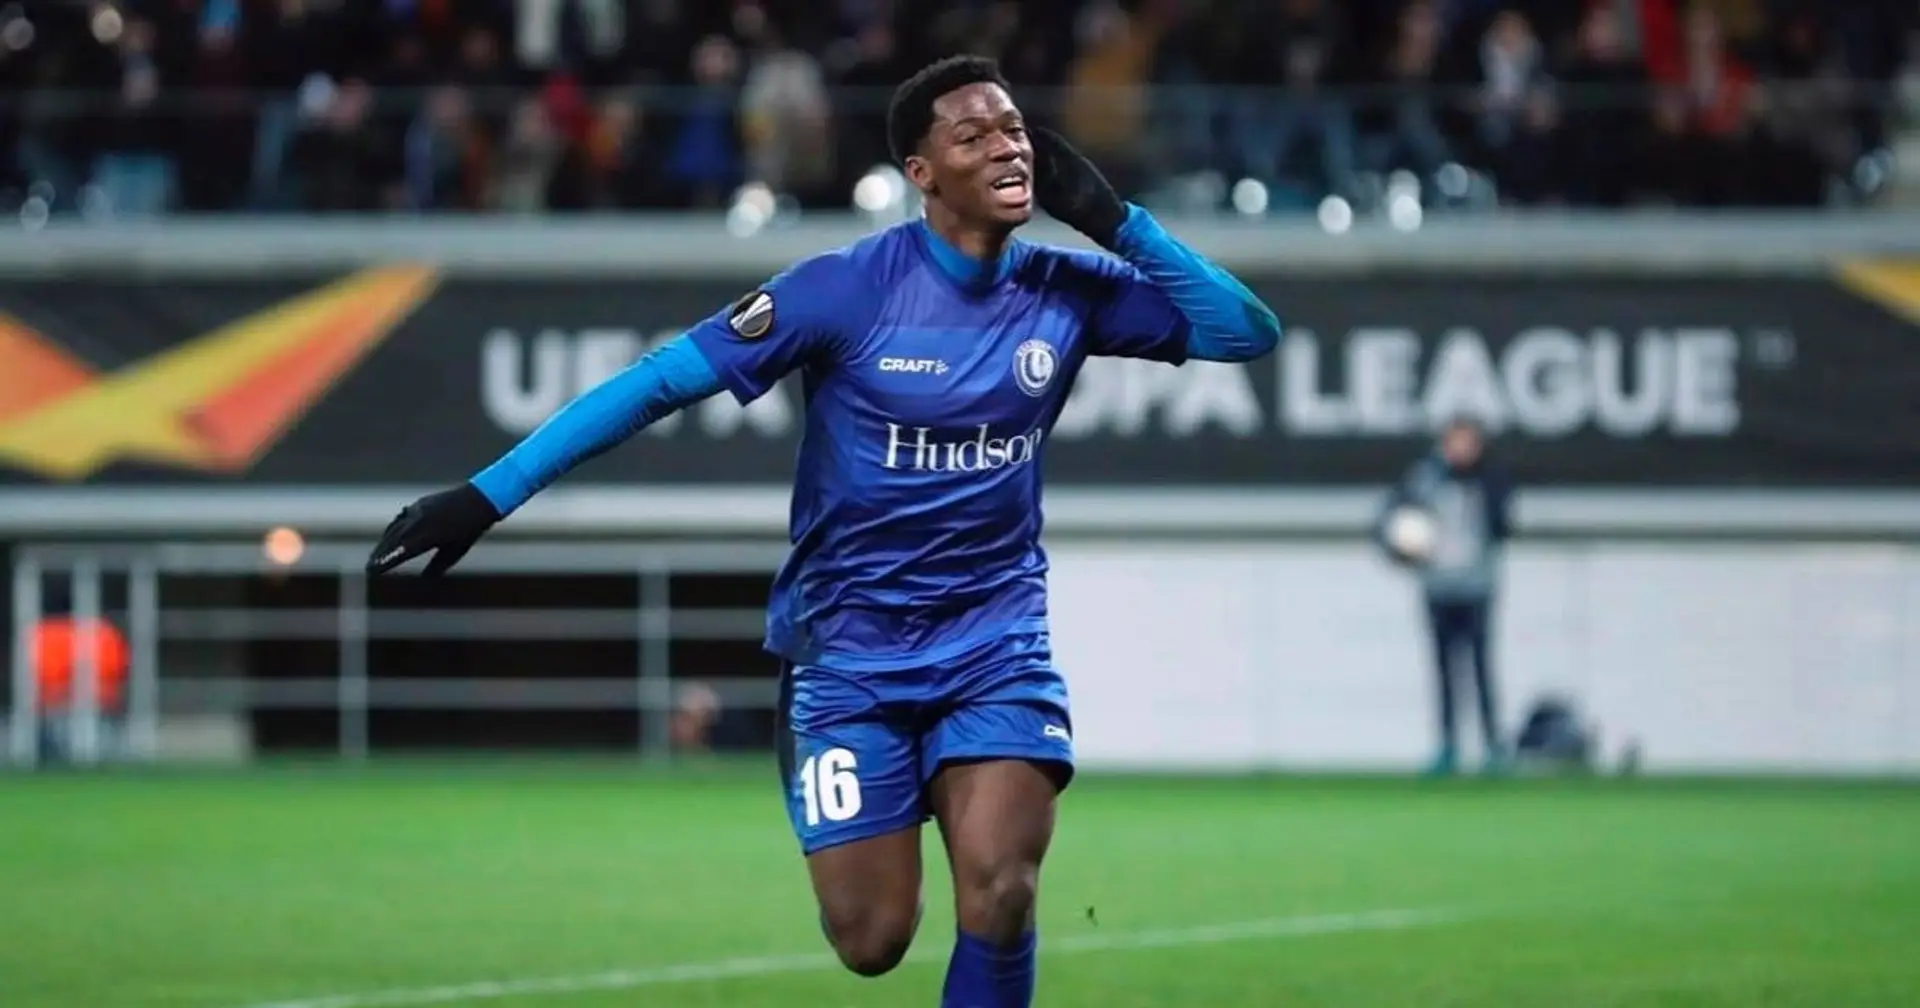 Arsenal-linked Gent starlet David dreams of playing in Premier League: 'That's my goal'